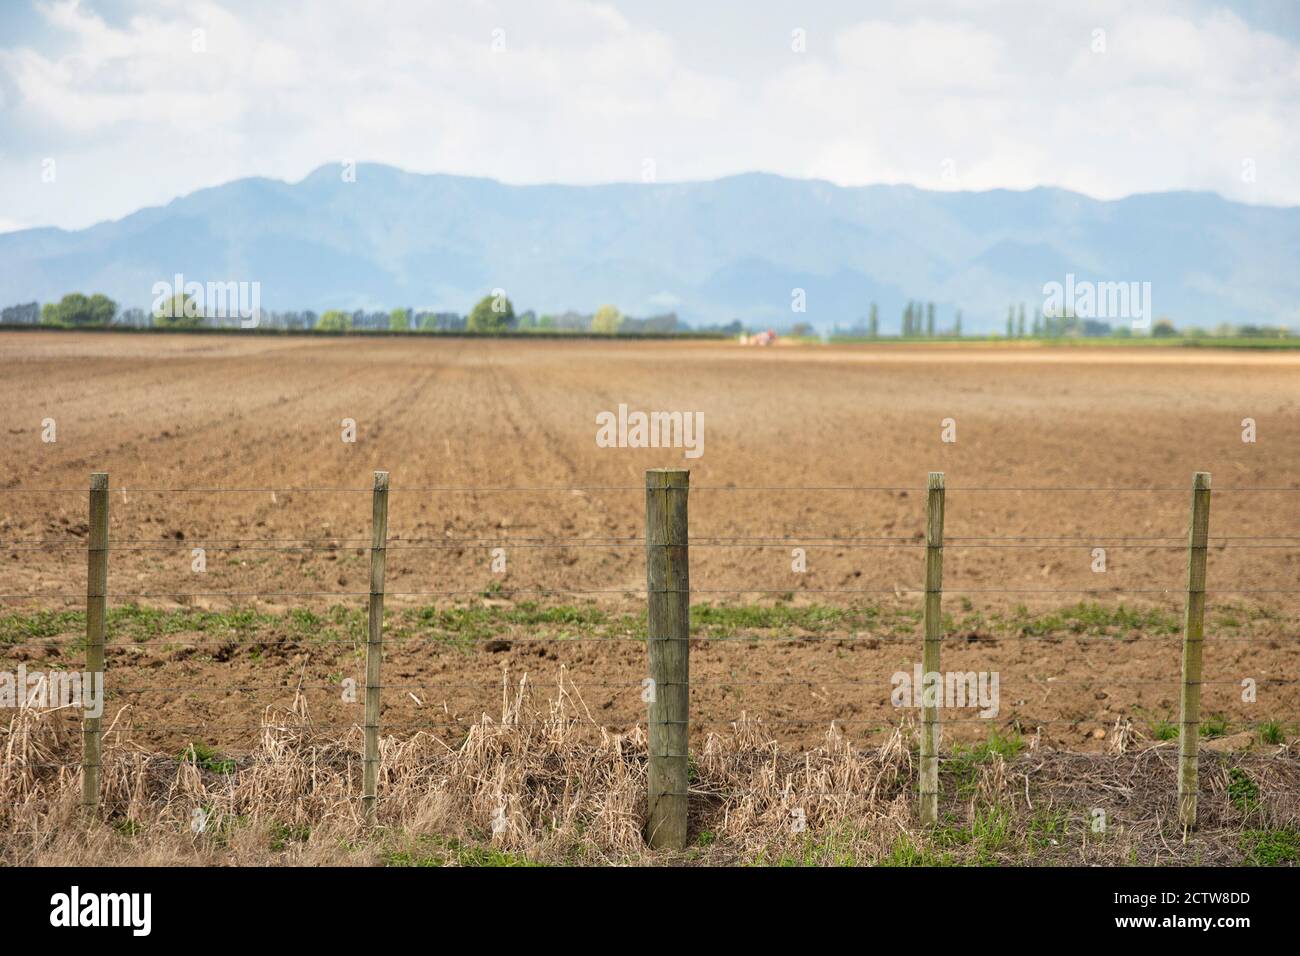 New Zealand farming industry in North Island countryside. Stock Photo